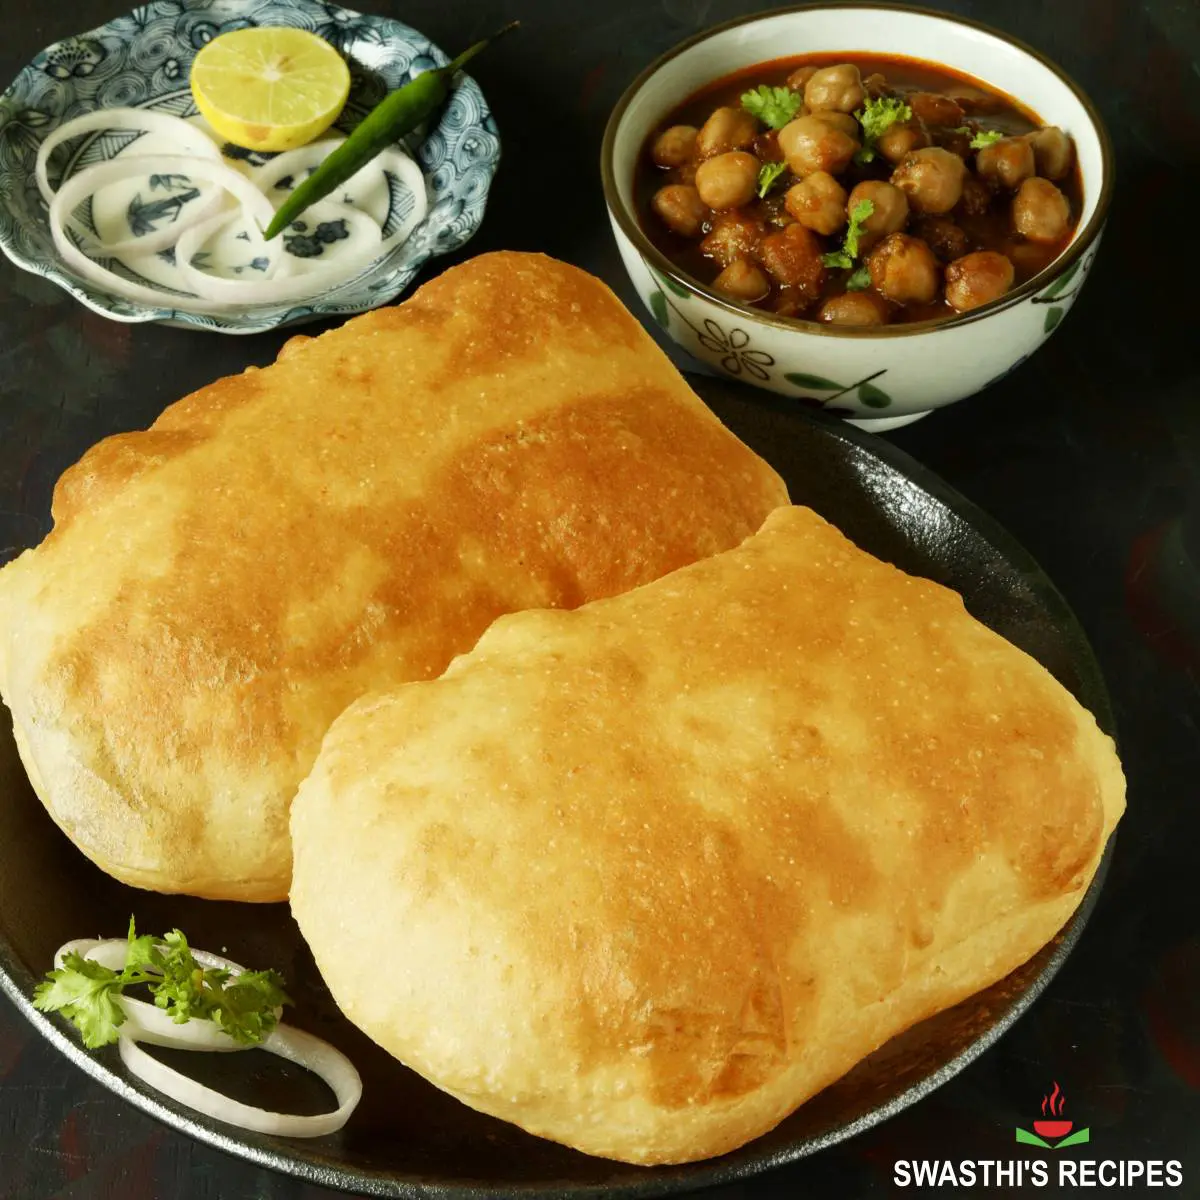 Bhatura with chole served with onions and lemon